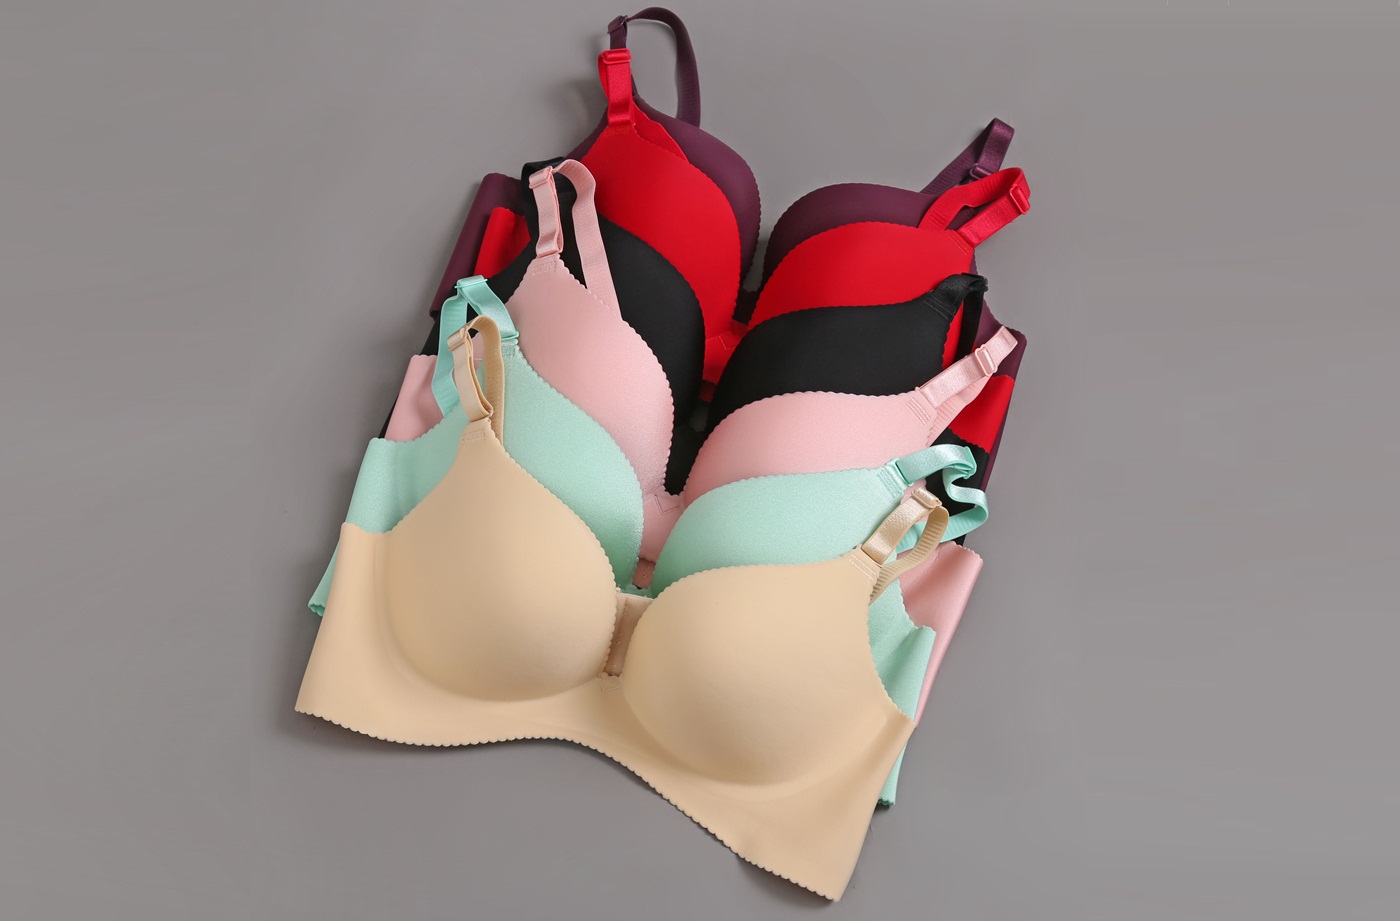 3 Reasons for Buying a Sexy Bra